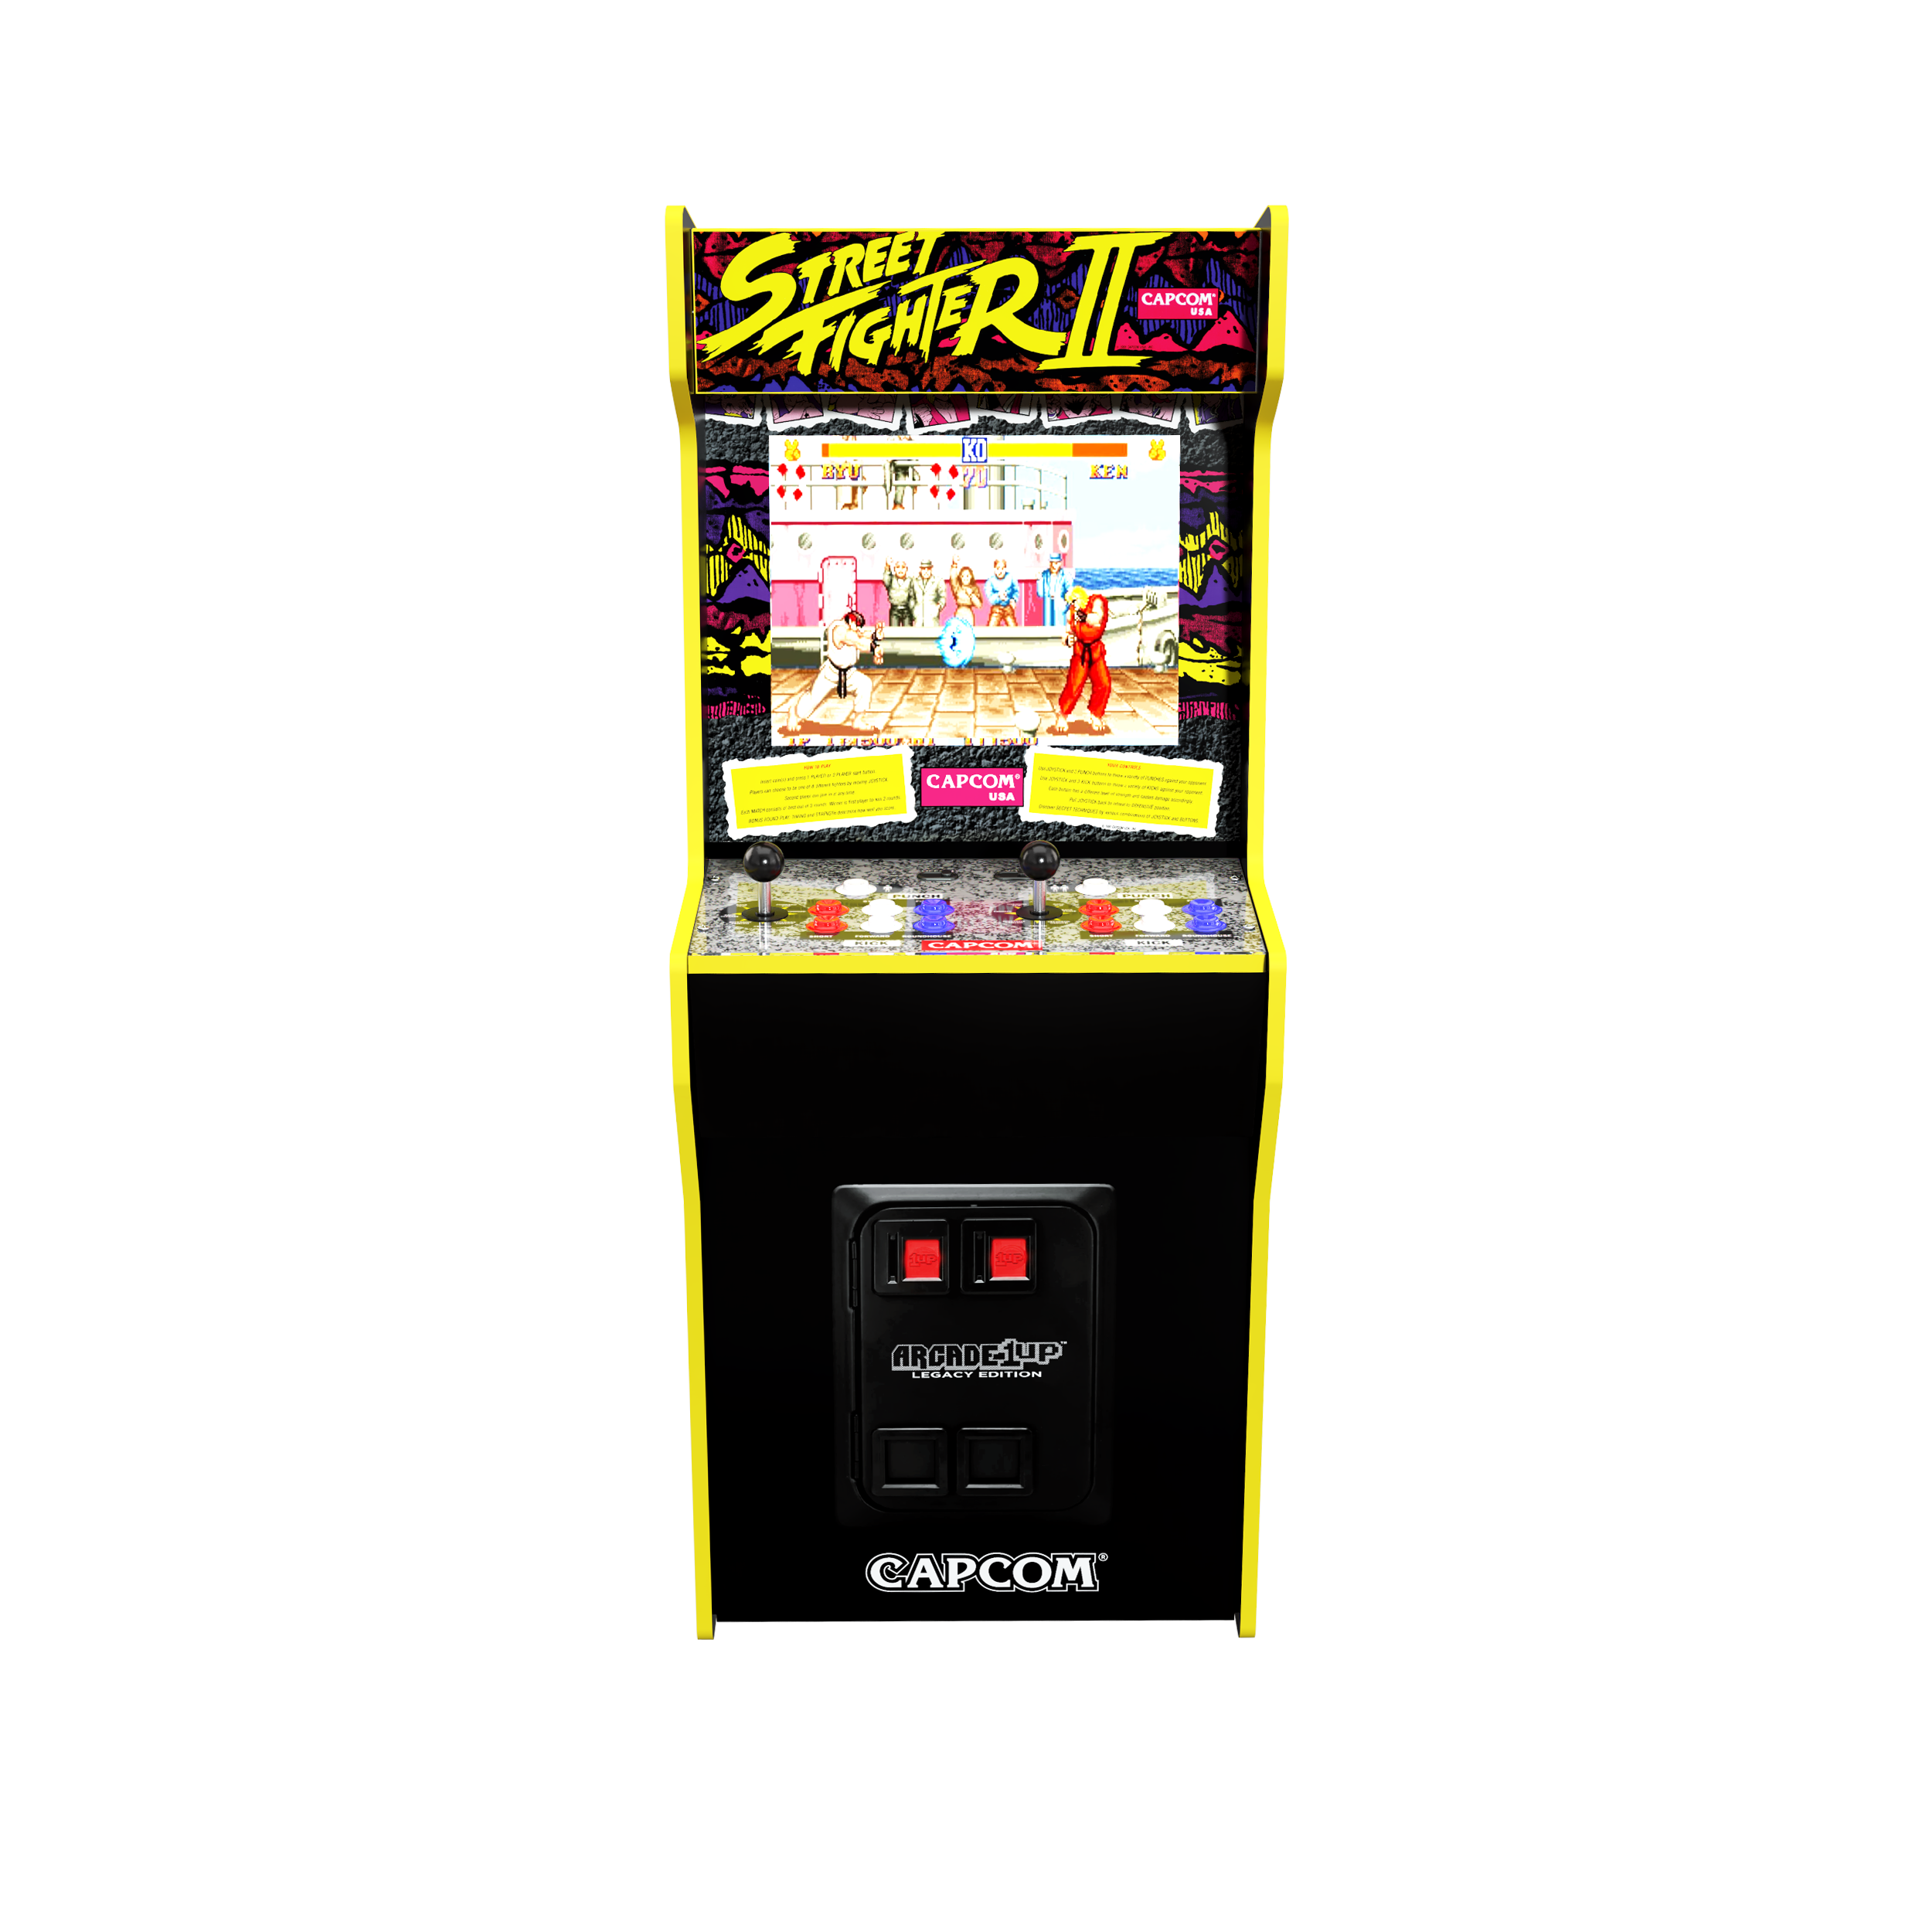 Arcade1Up, Street Fighter, 12-in-1 Capcom Legacy Arcade - image 1 of 7